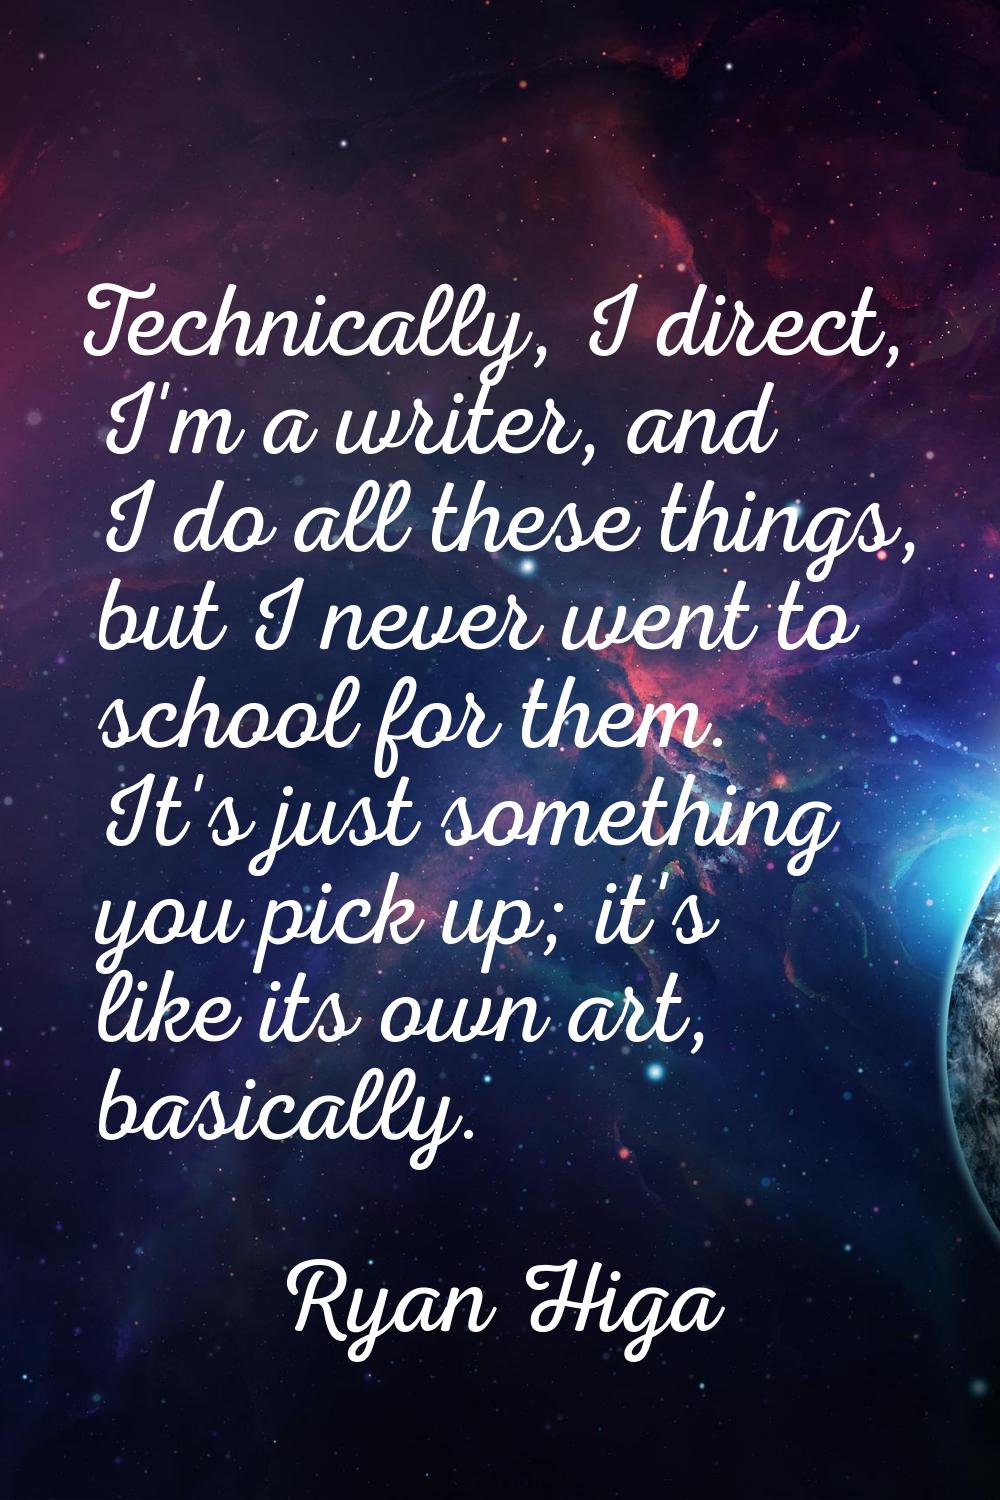 Technically, I direct, I'm a writer, and I do all these things, but I never went to school for them